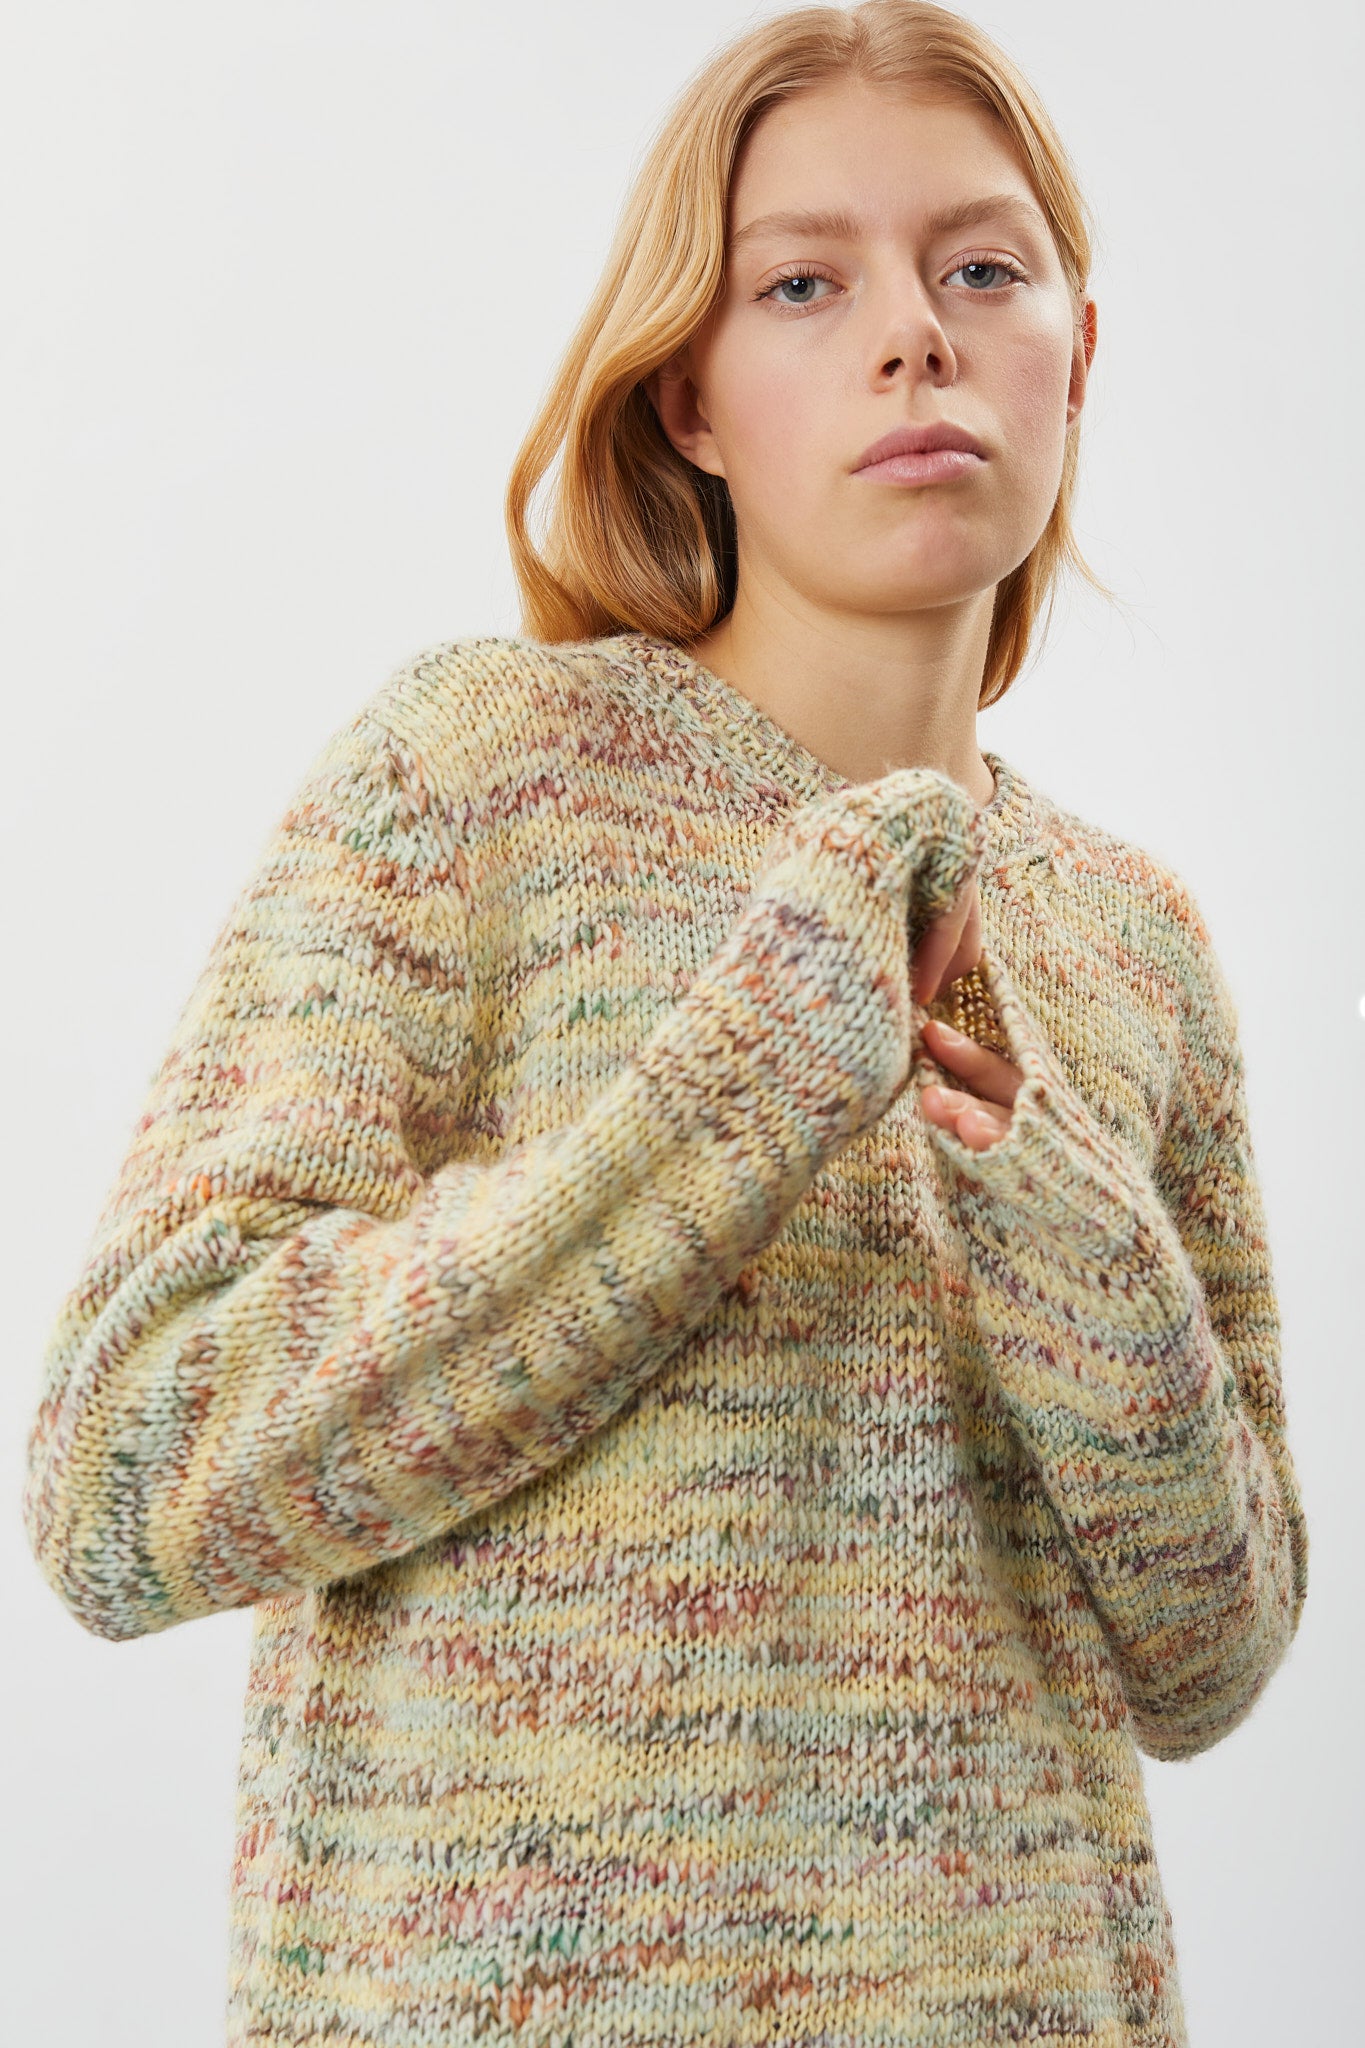 nué notes Vinny Pullover - Yellow Rainbow PULLOVERS 032 Multi Yellow